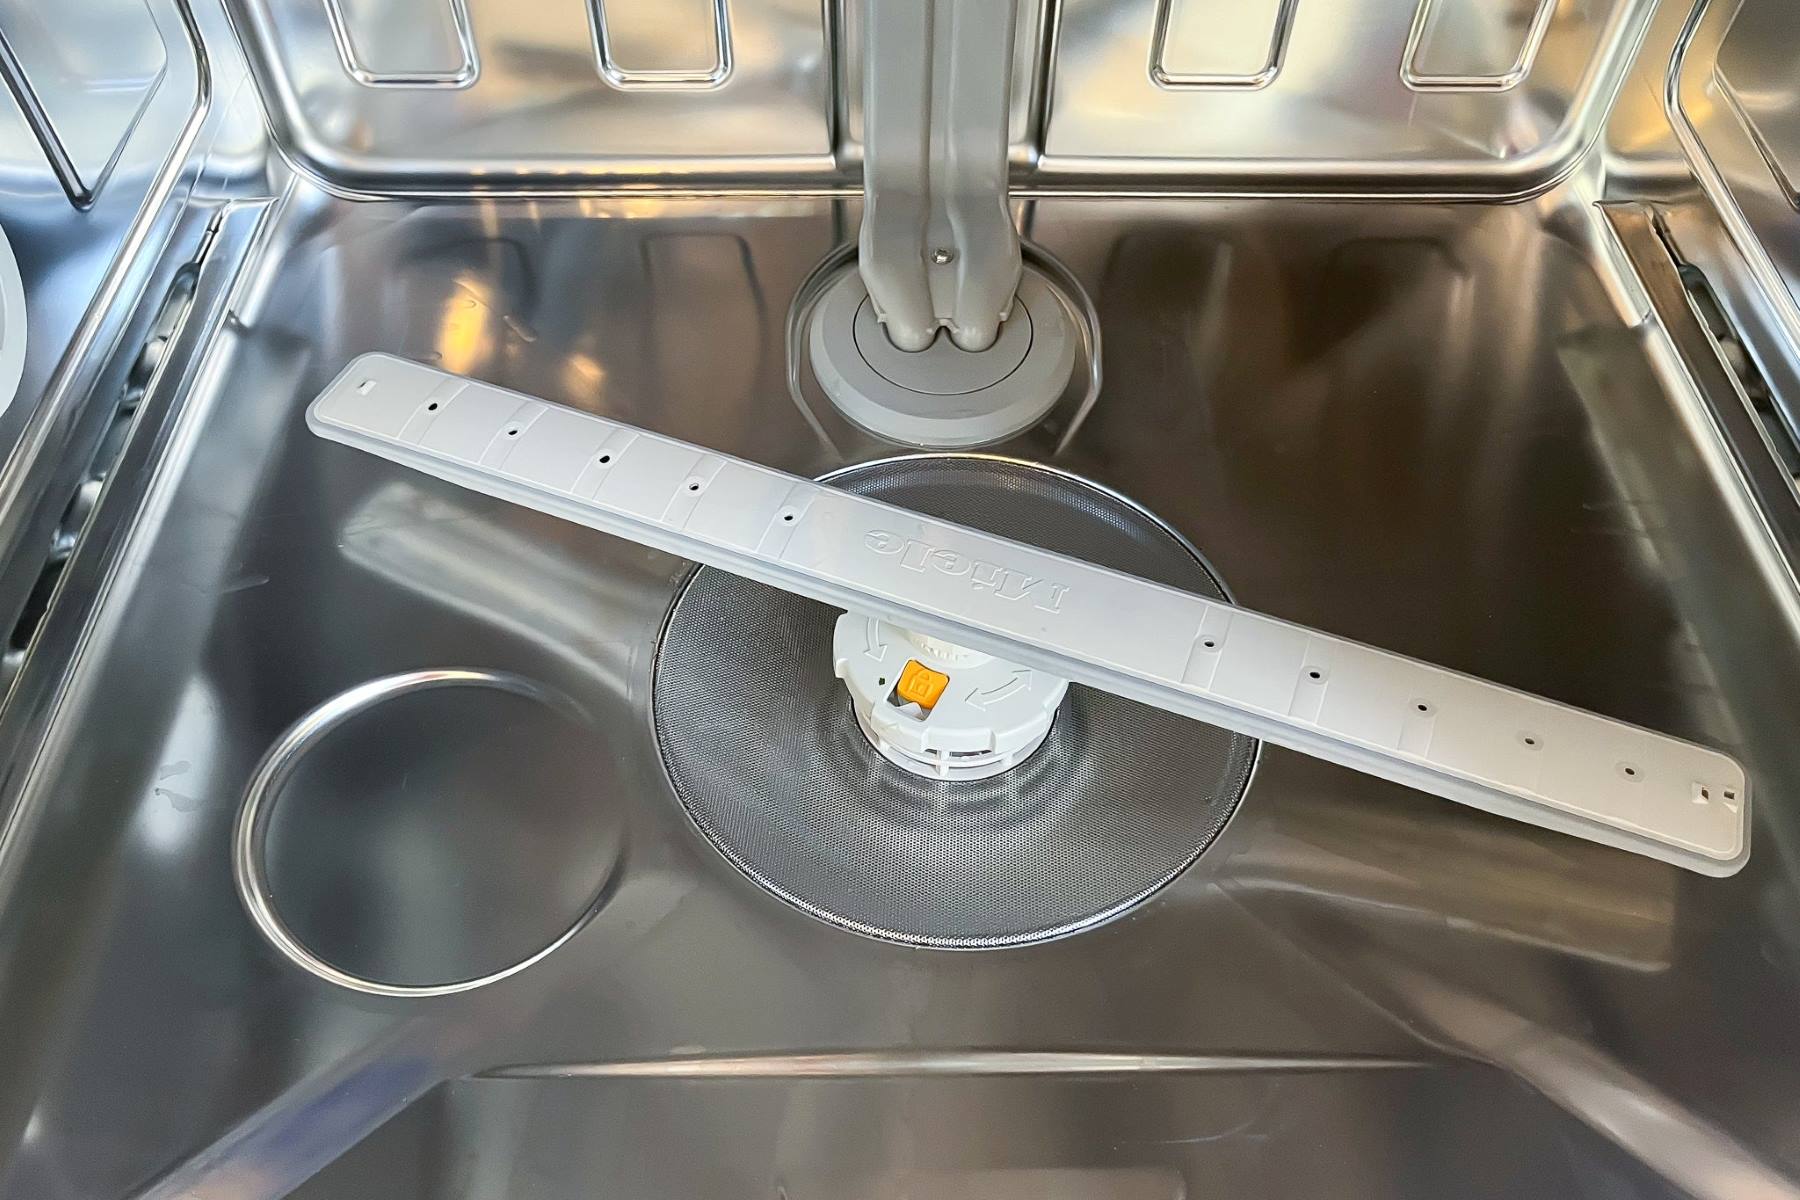 How To Clean Strainer In Dishwasher